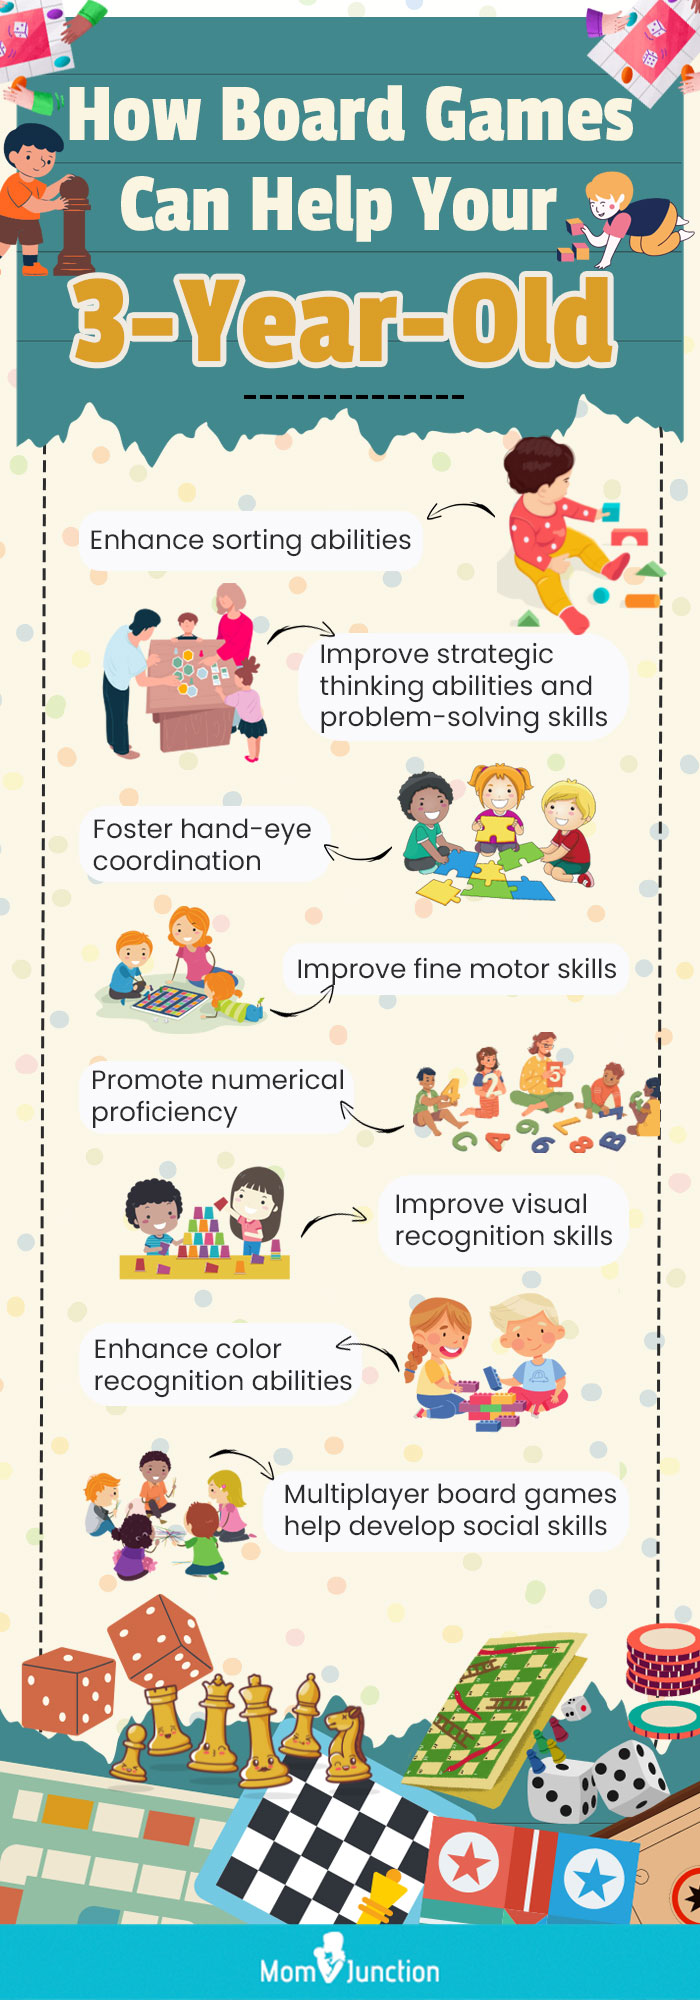 How-Board-Games-Can-Help-Your-3-Year-Old (infographic)